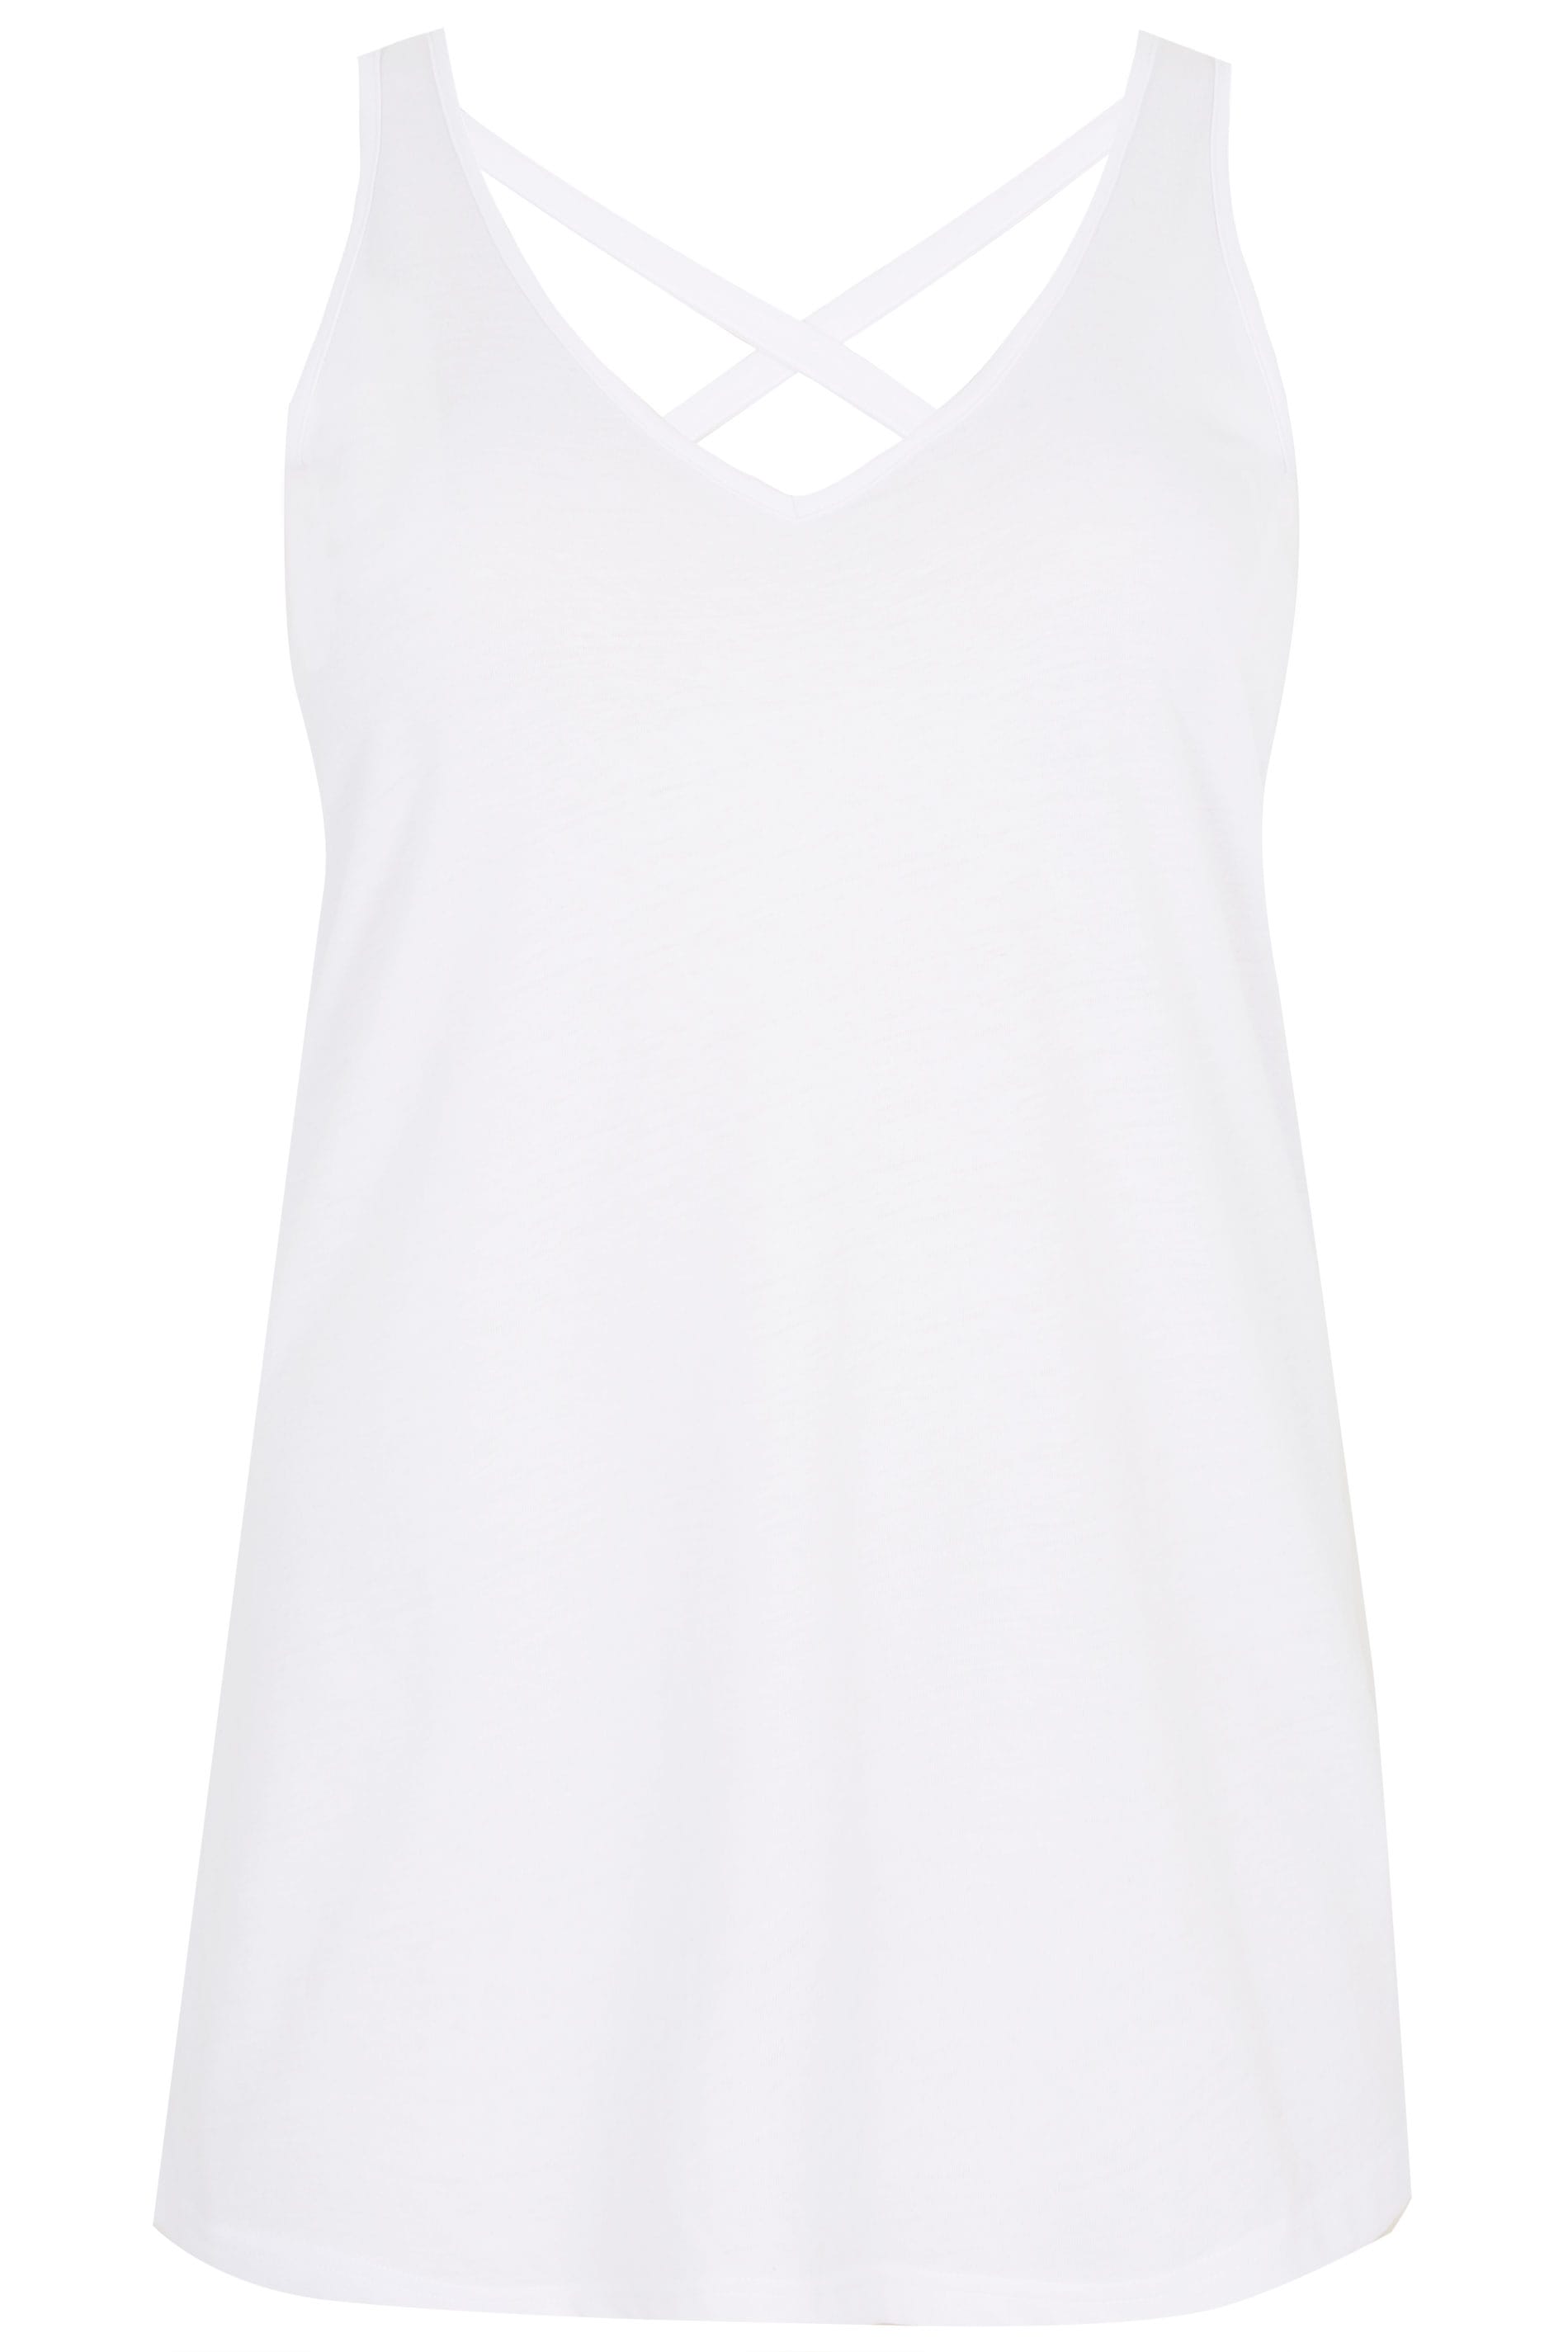 Plus Size White Cross Back Vest | Sizes 16 to 36 | Yours Clothing